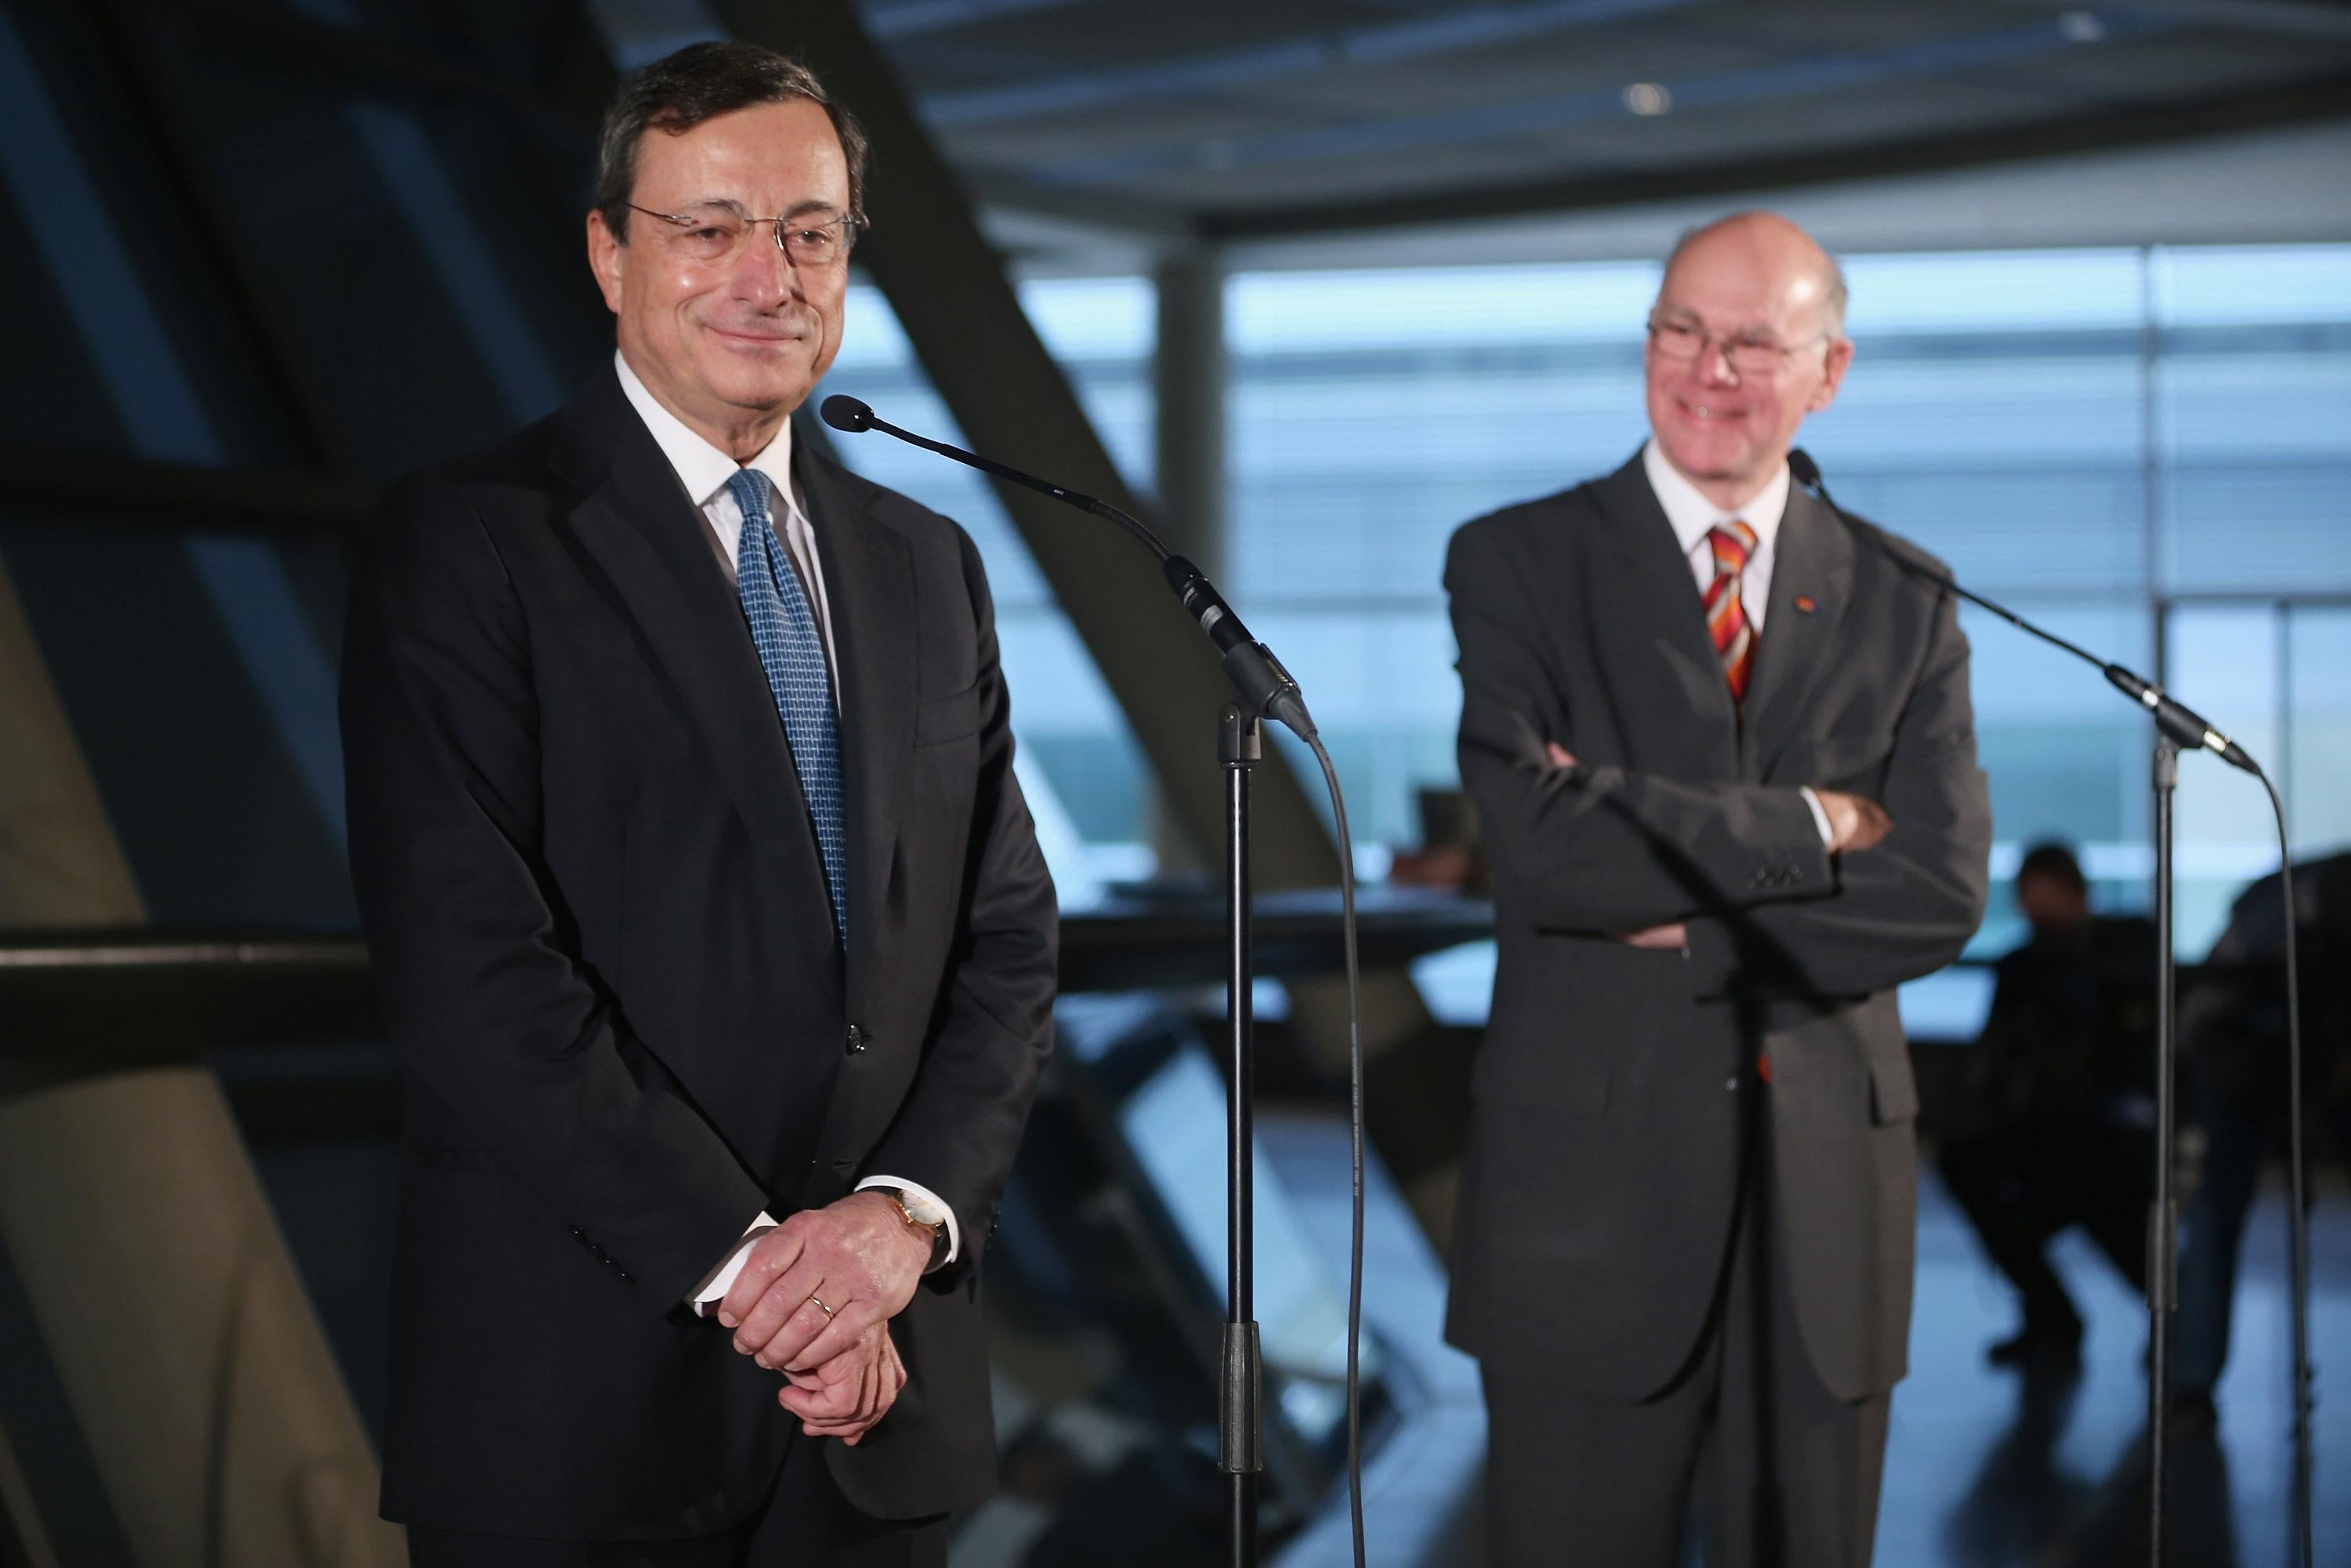 Mario Draghi, president of the European Central Bank, and Bundestag President Norbert Lammert speak to the media at the Bundestag after Draghi spoke to German parliamentarians on Oct. 24, 2012, in Berlin.